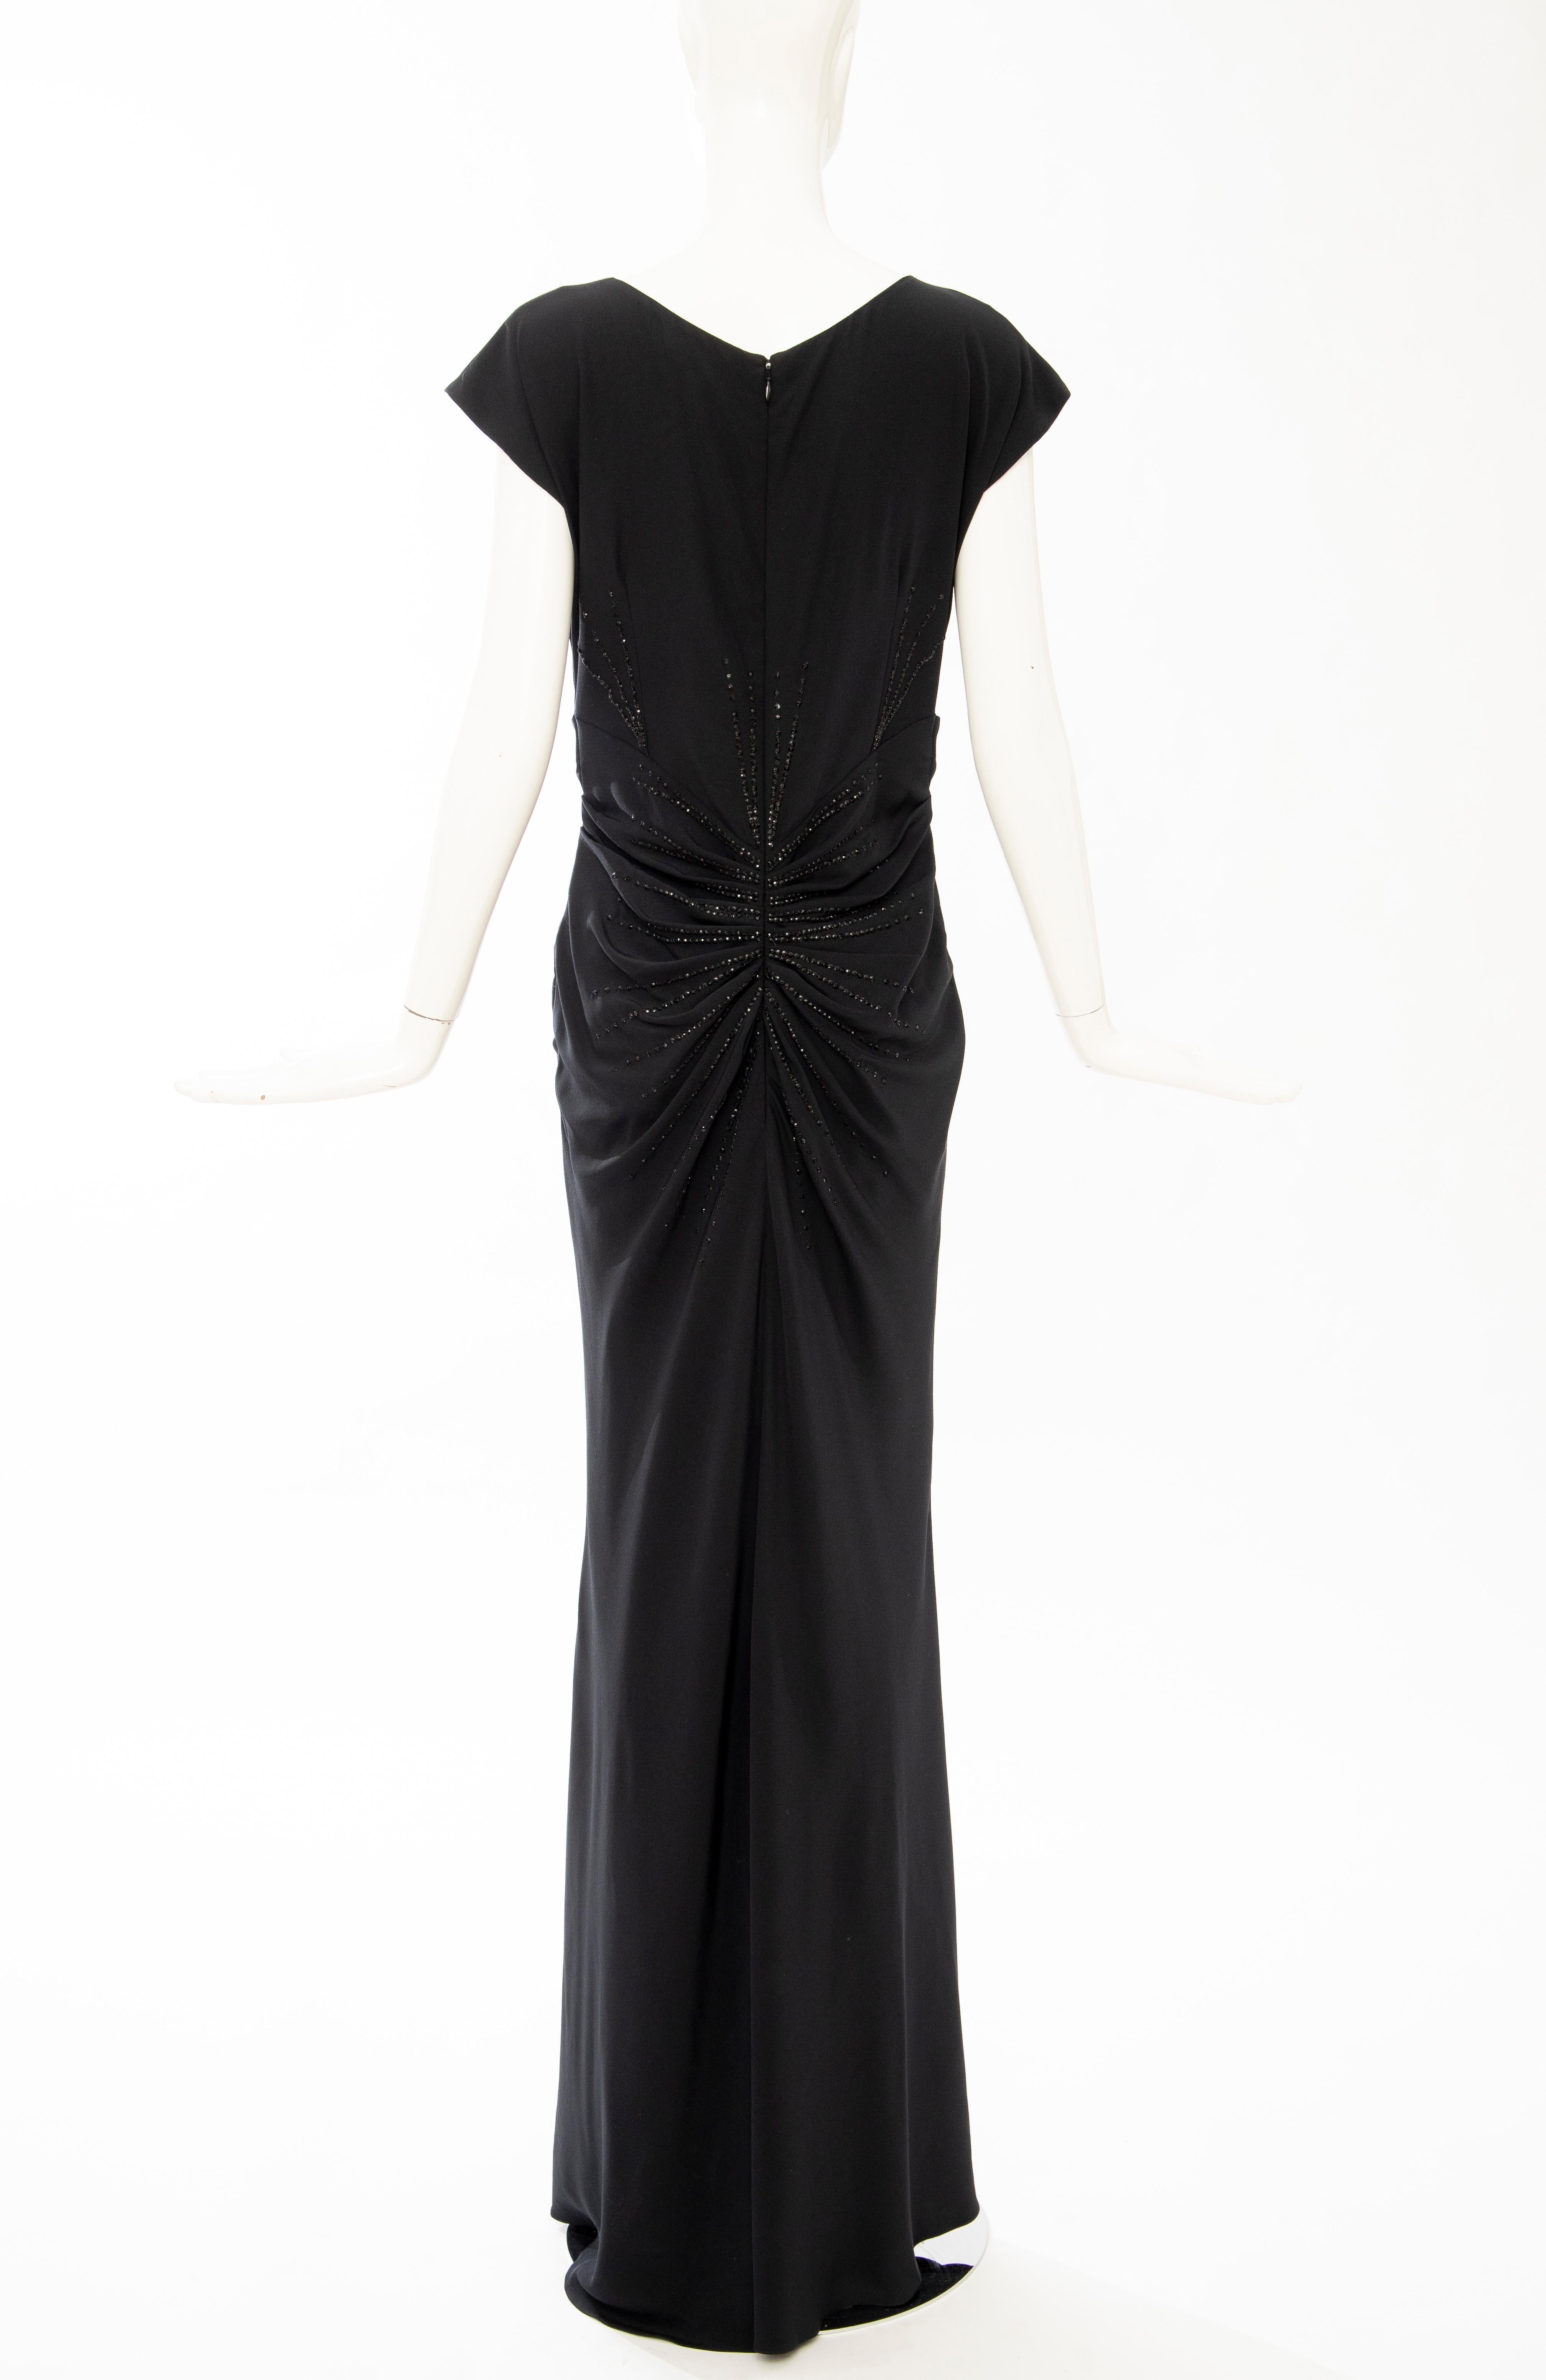 John Galliano for Christian Dior Black Embroidered Evening Dress, Spring 2008 4